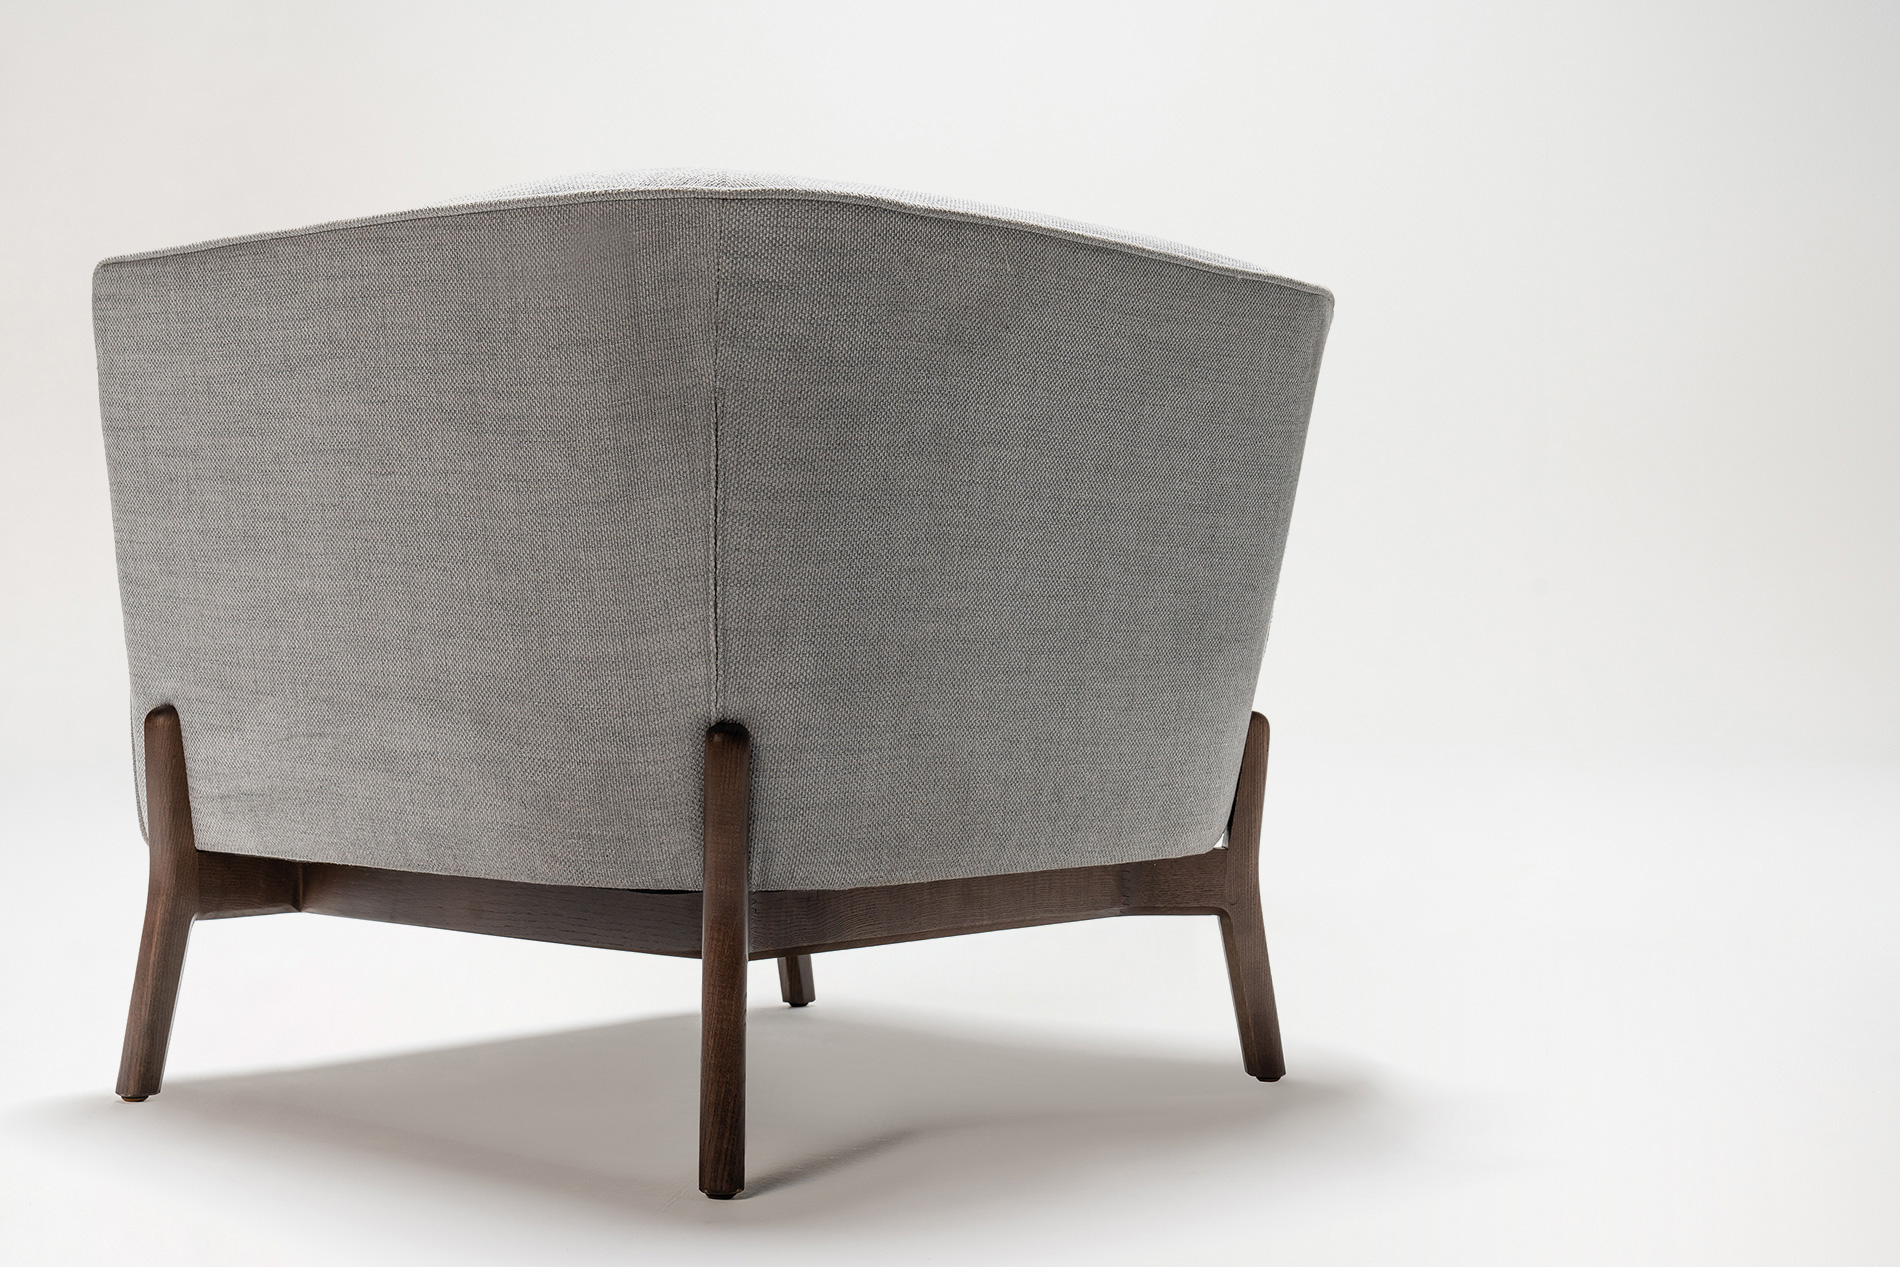 A masterpiece of contrasts, Orvi lounge merges simplicity with profound soul.ORVI CLUB ARMCHAIR